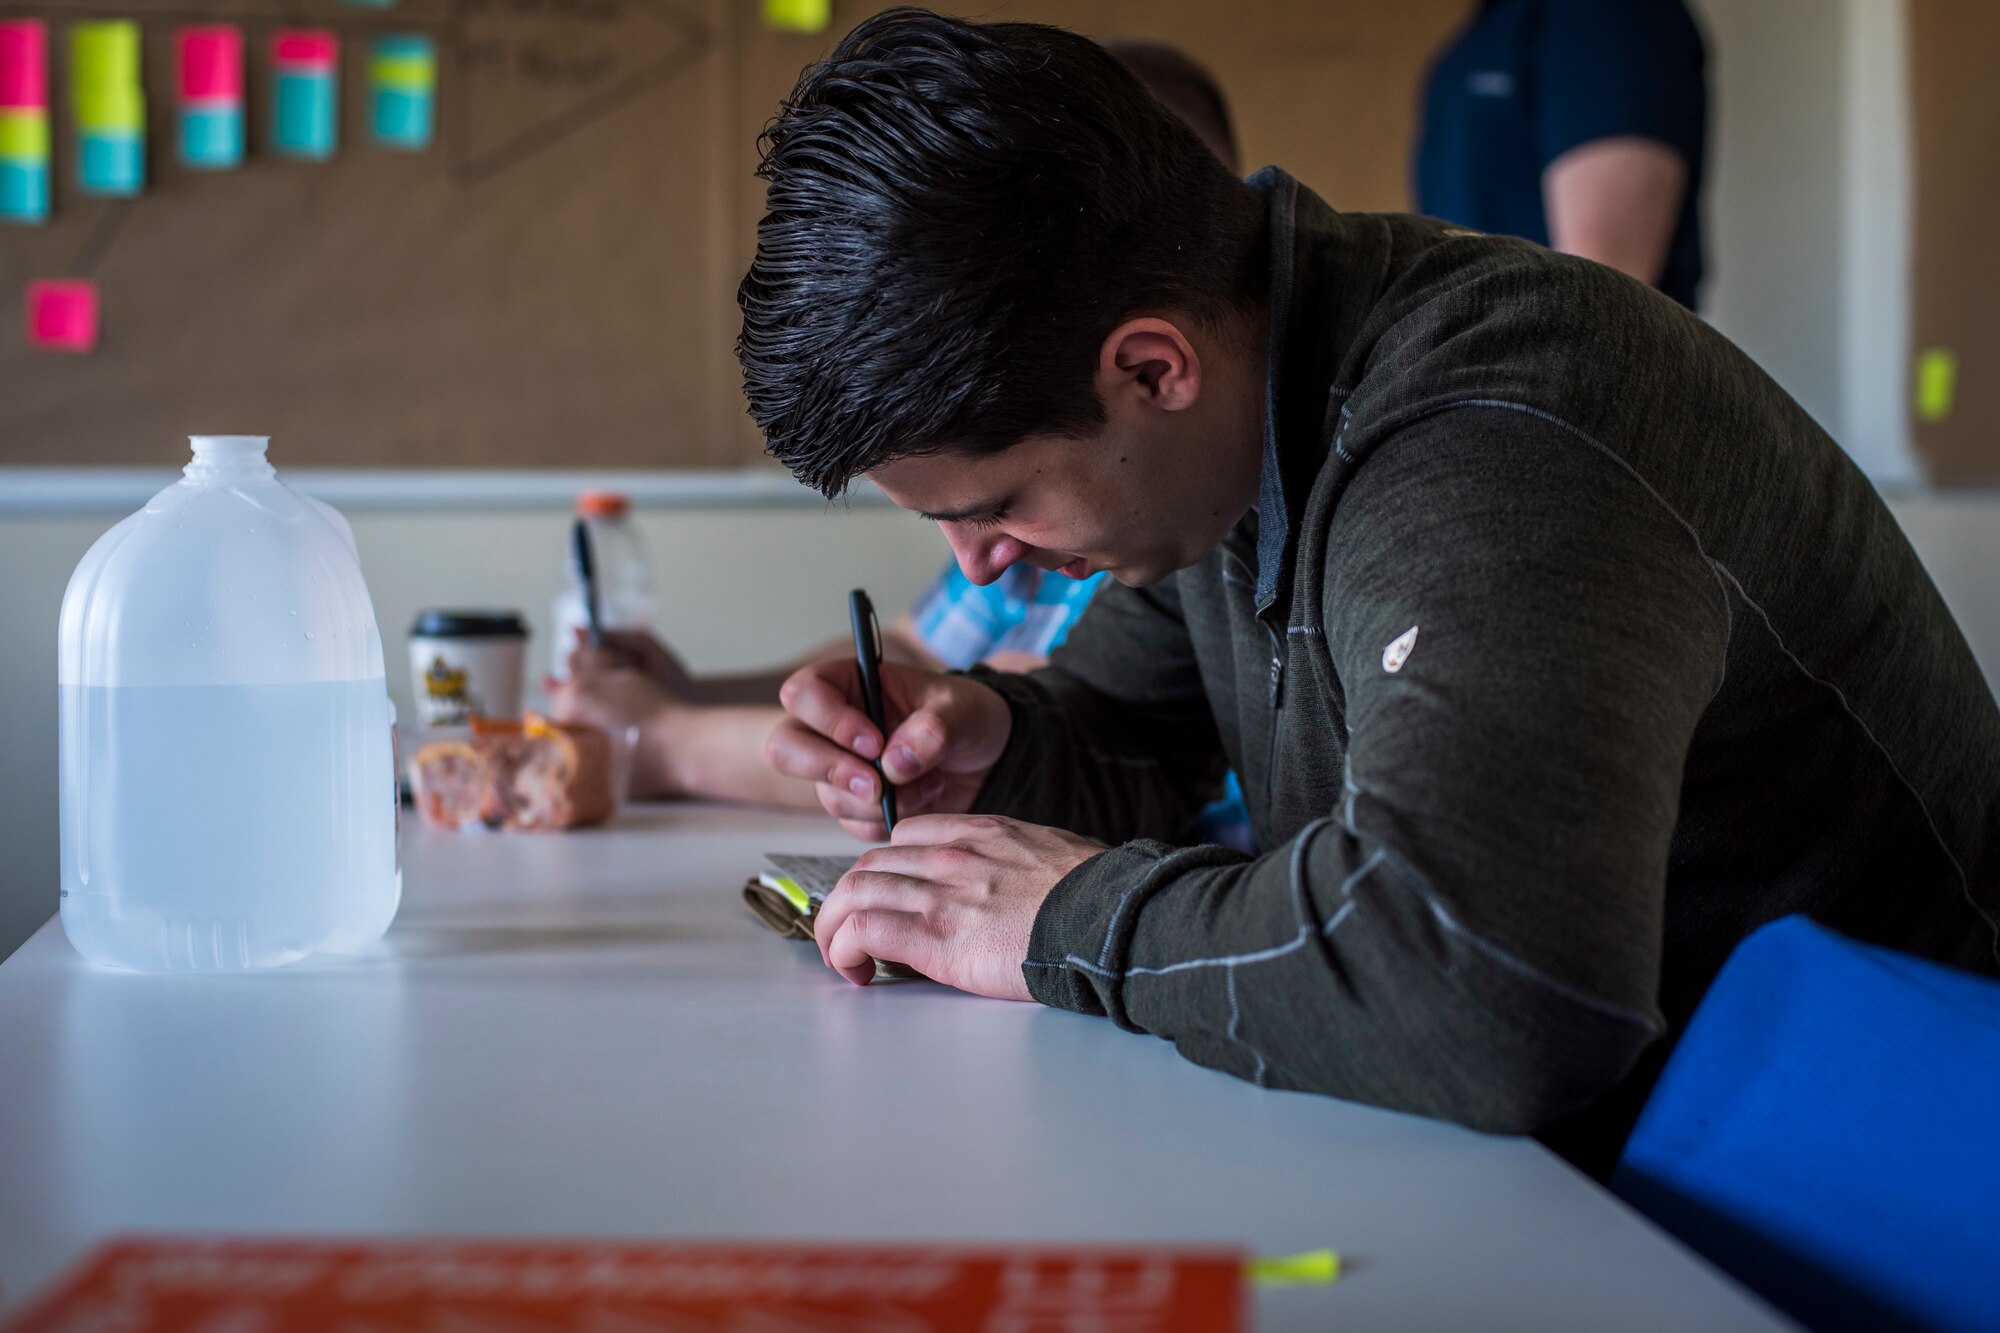 U.S. Air Force Senior Airman Daniel Ruzicka, a 35th Maintenance Squadron transient alert member, takes notes on how to effectively problem solve during the Continuous Process Improvement program at Misawa Air Base, Japan, May 22, 2018. The goal of CPI is to acknowledge shortcomings within squadrons and use an eight-step solution to resolve noted issues.